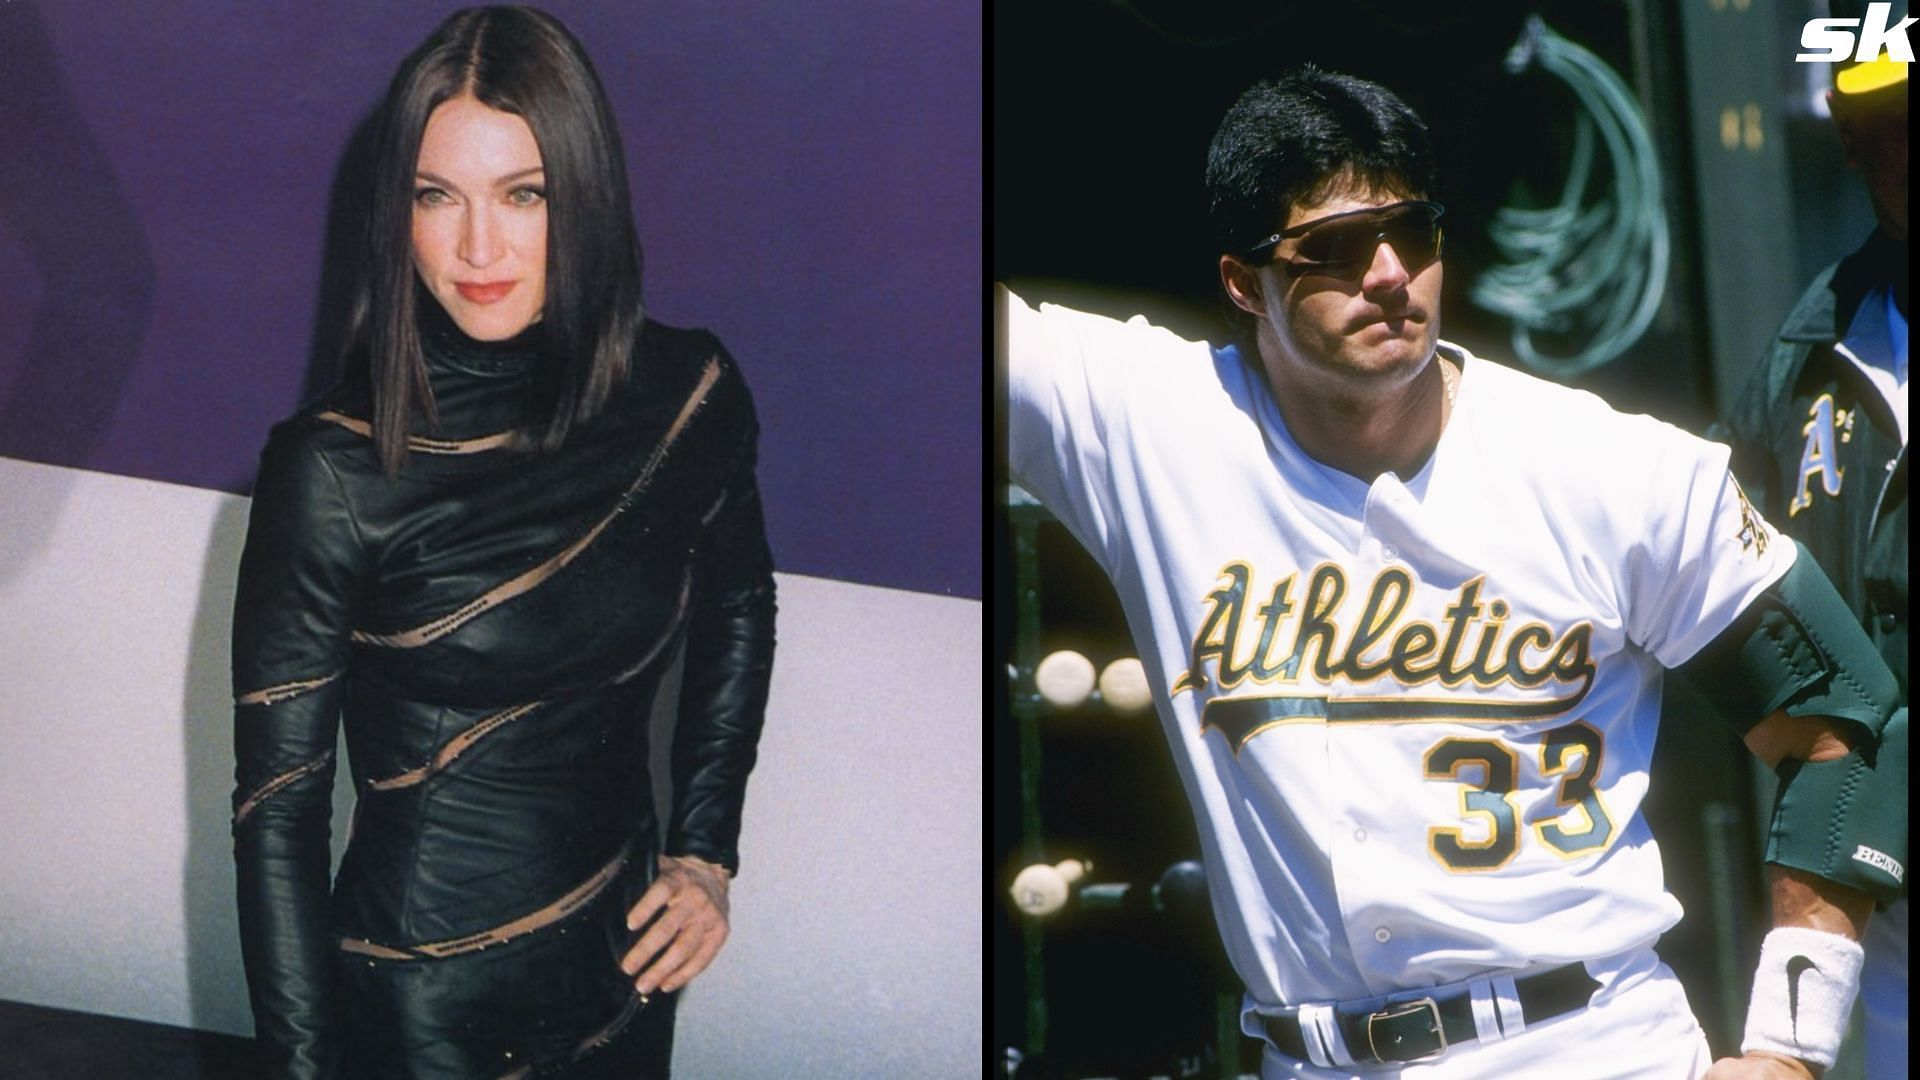 Pop sensation Madonna once got candid with Jose Canseco about wearing dazzling accessories